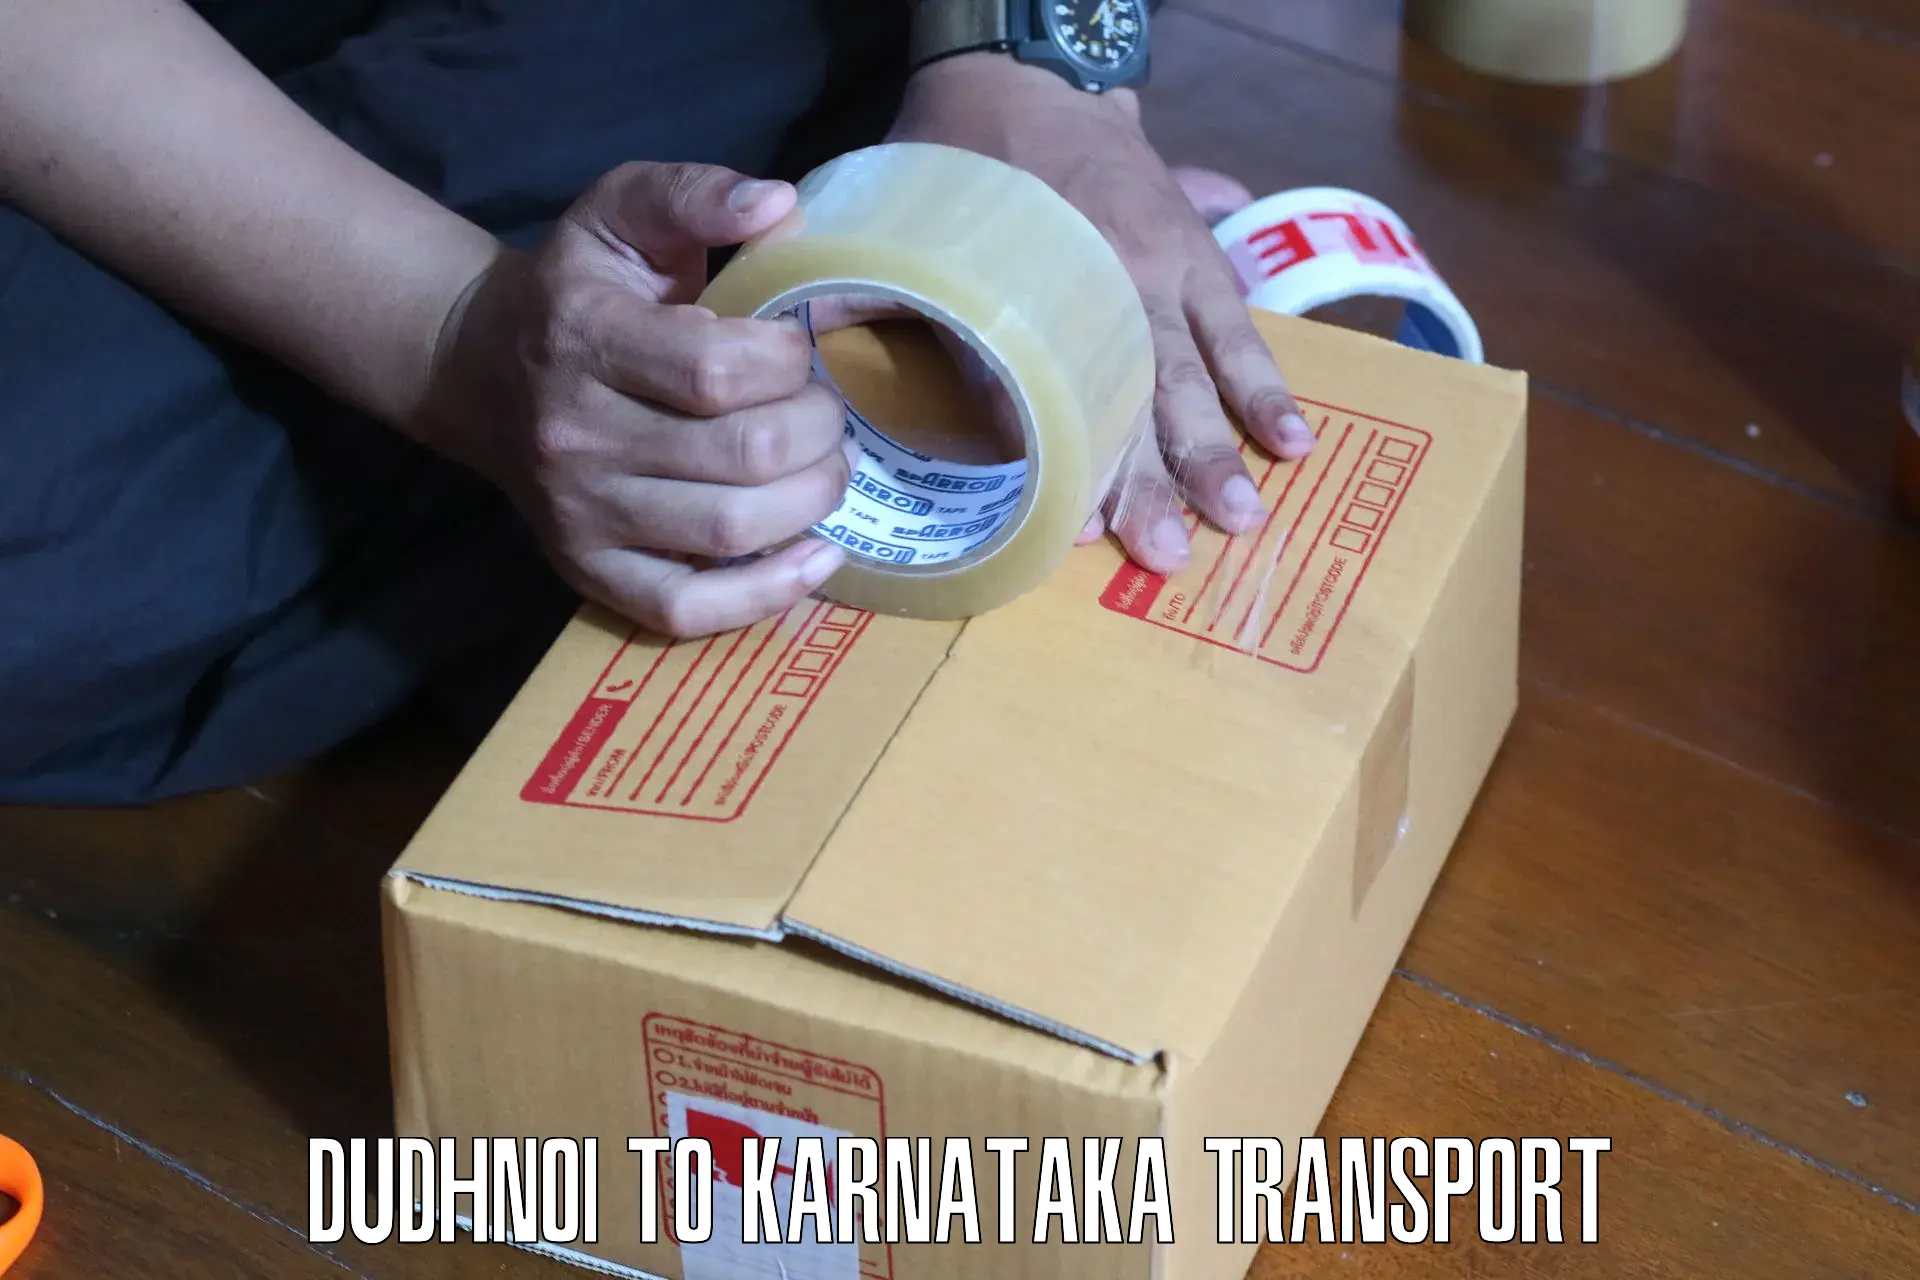 Commercial transport service Dudhnoi to Mangalore Port